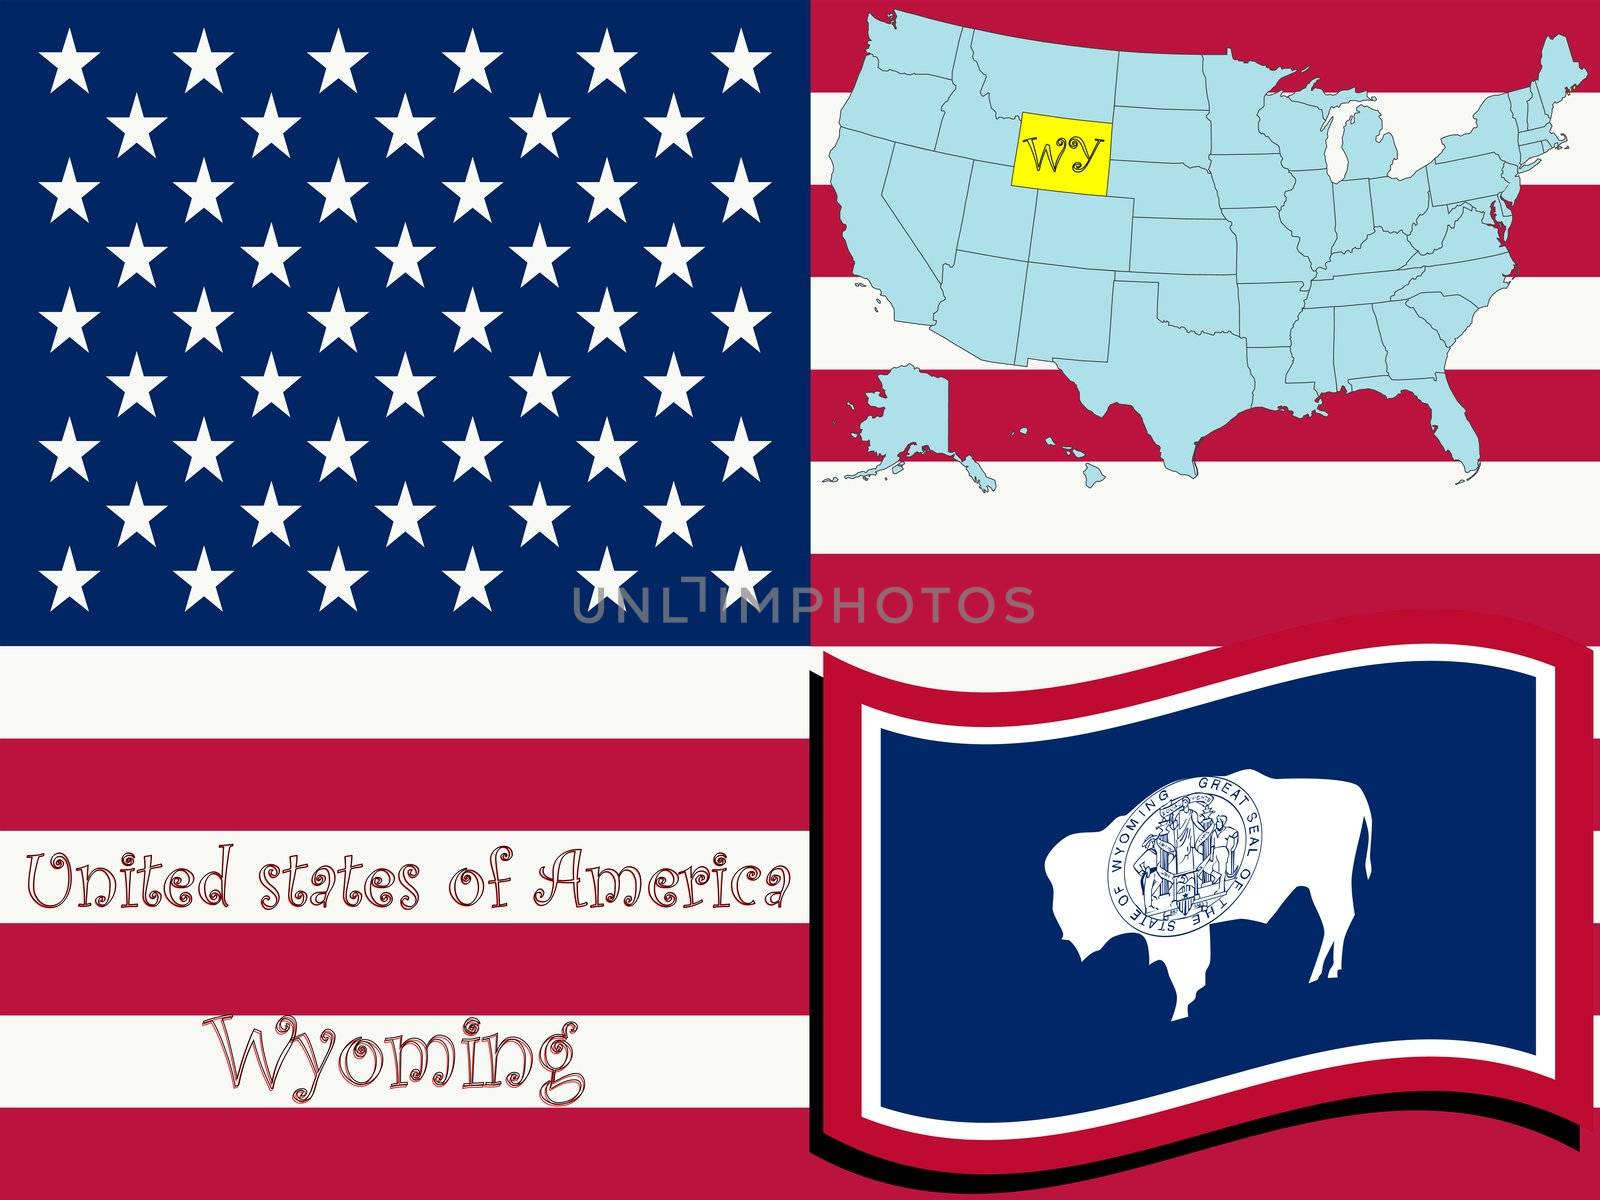 wyoming state illustration by robertosch